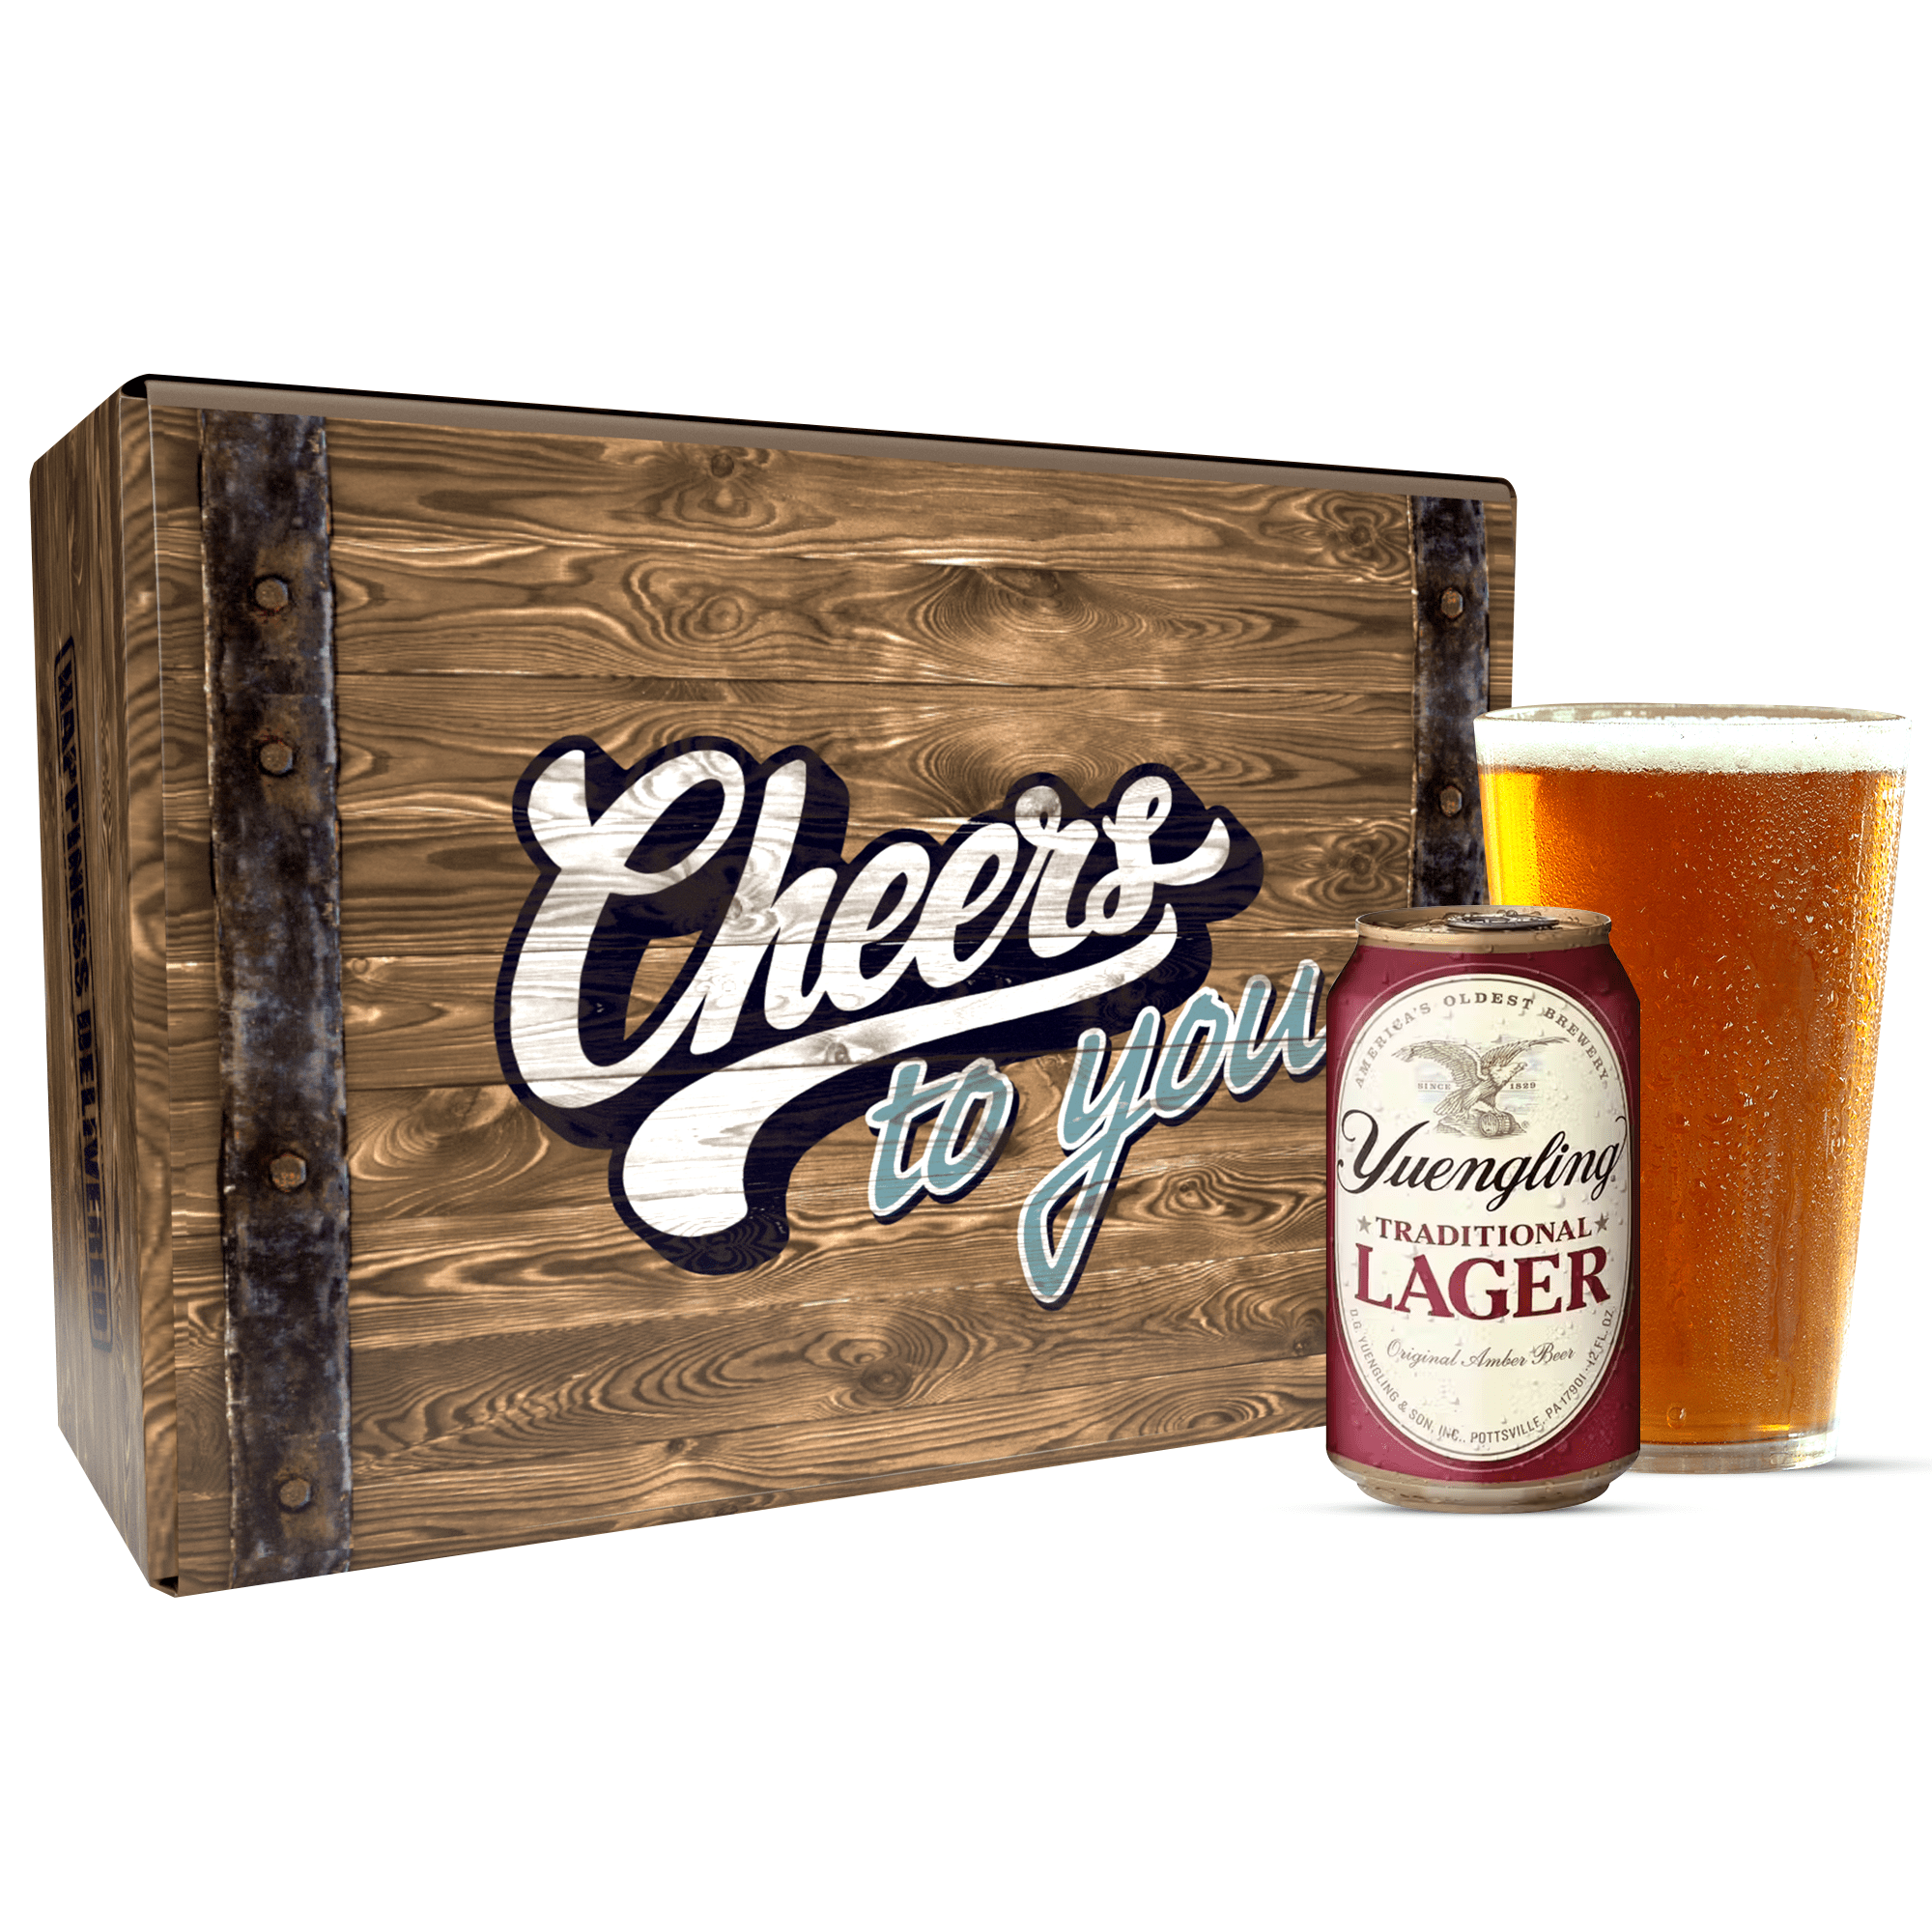 Yuengling Beer - 24 Pack Box